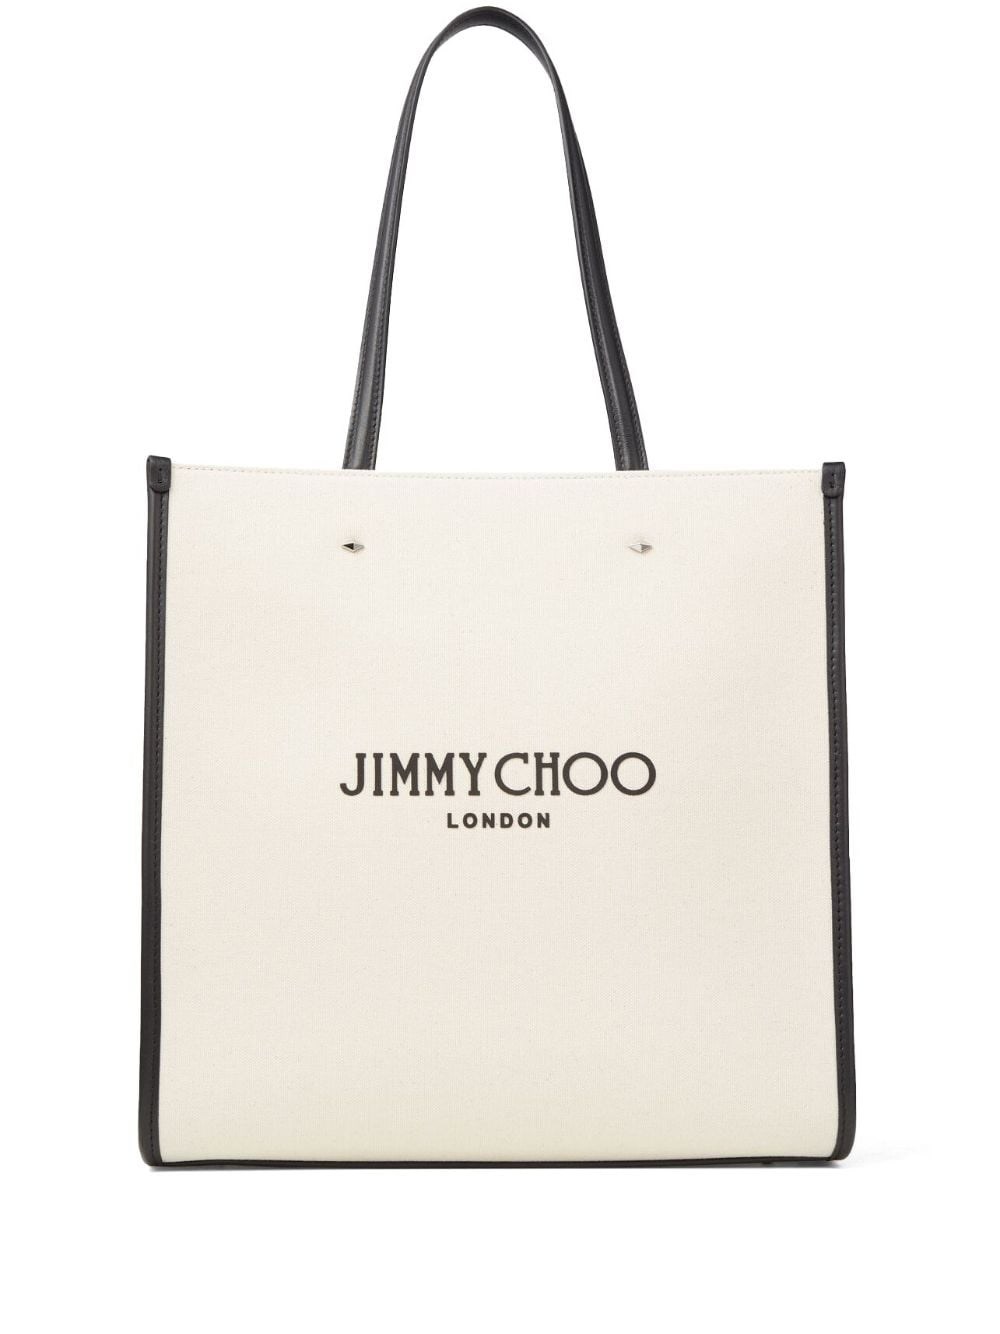 Jimmy Choo White Canvas And Black Leather Tote Bag